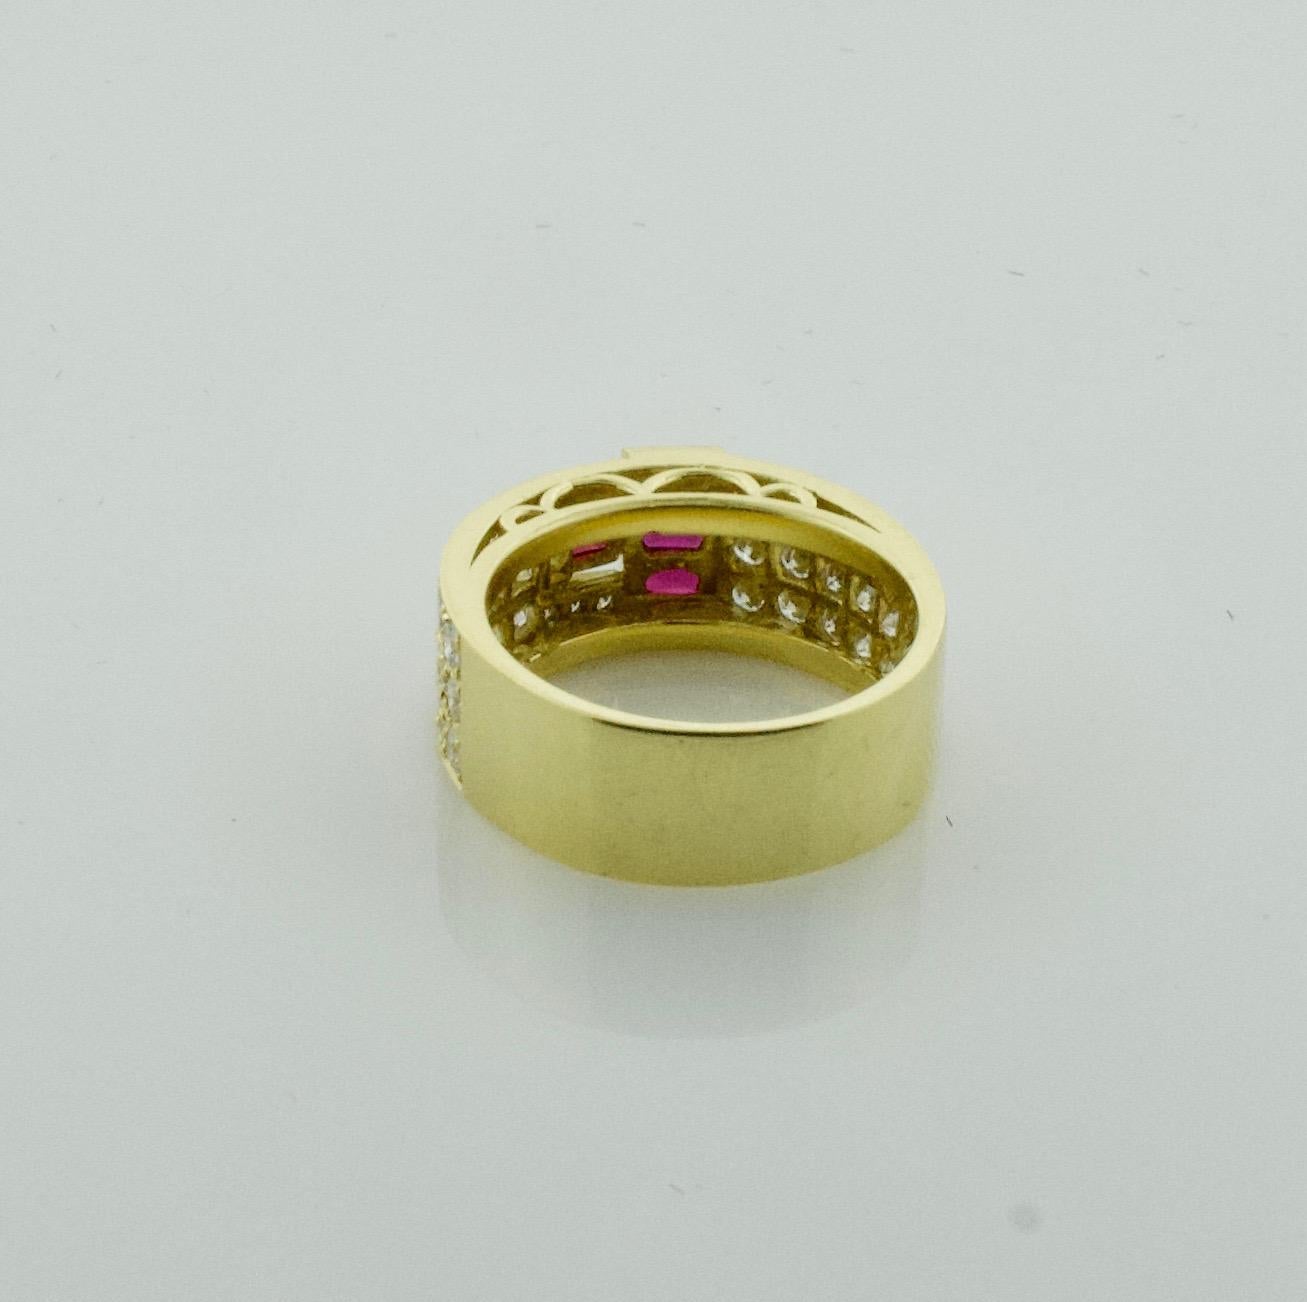 Exquisite Diamond and Ruby Wedding Band Ring in 18 Karat In Excellent Condition For Sale In Wailea, HI